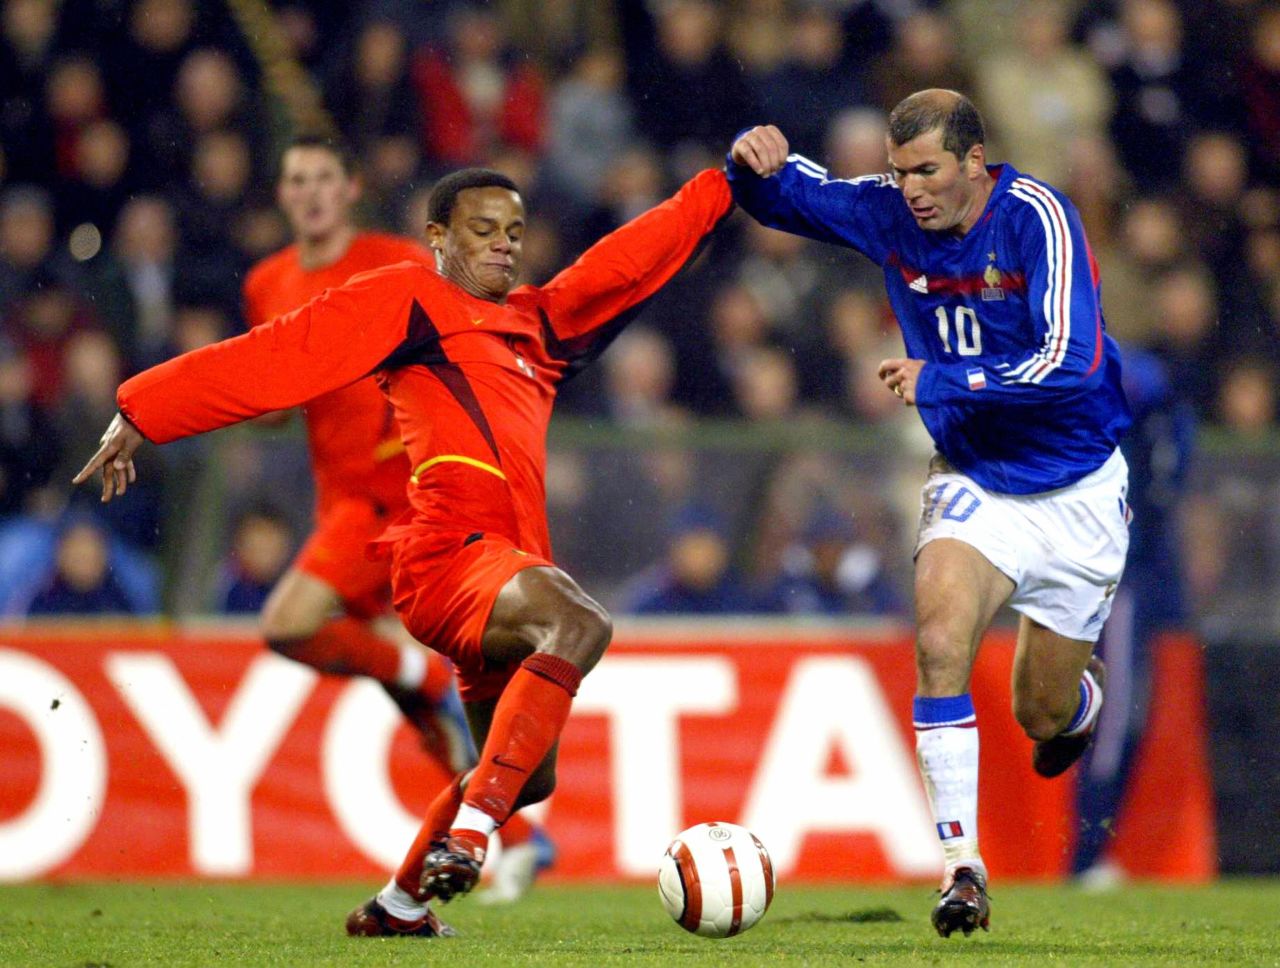 Kompany made his international debut for Belgium against France in 2004, aged 17. Ten years later, he led Belgium to their first World Cup for 12 years. 